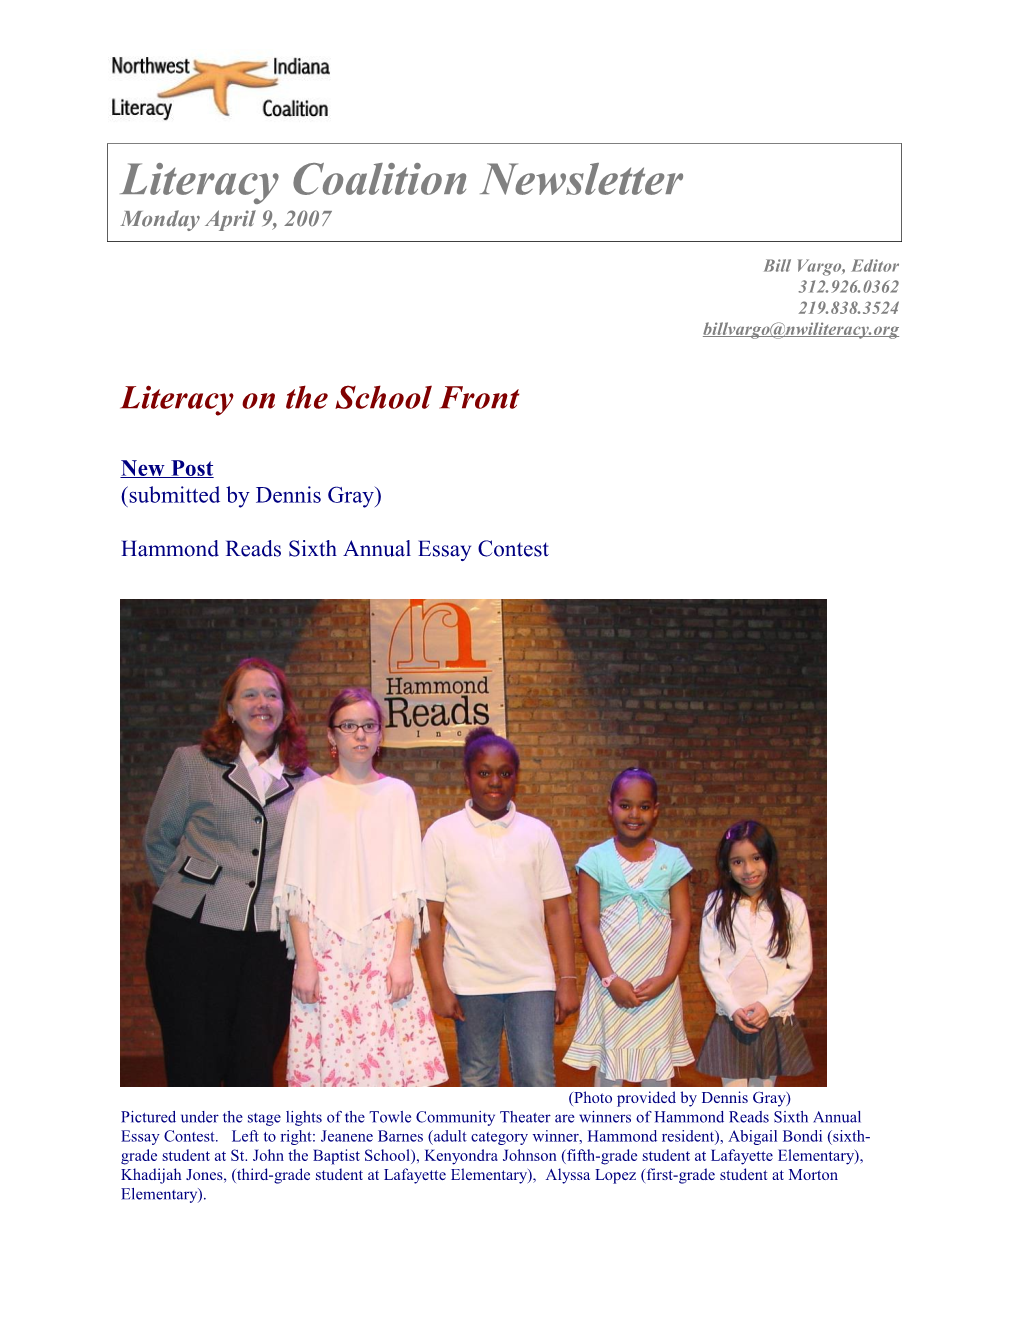 Literacy on the School Front